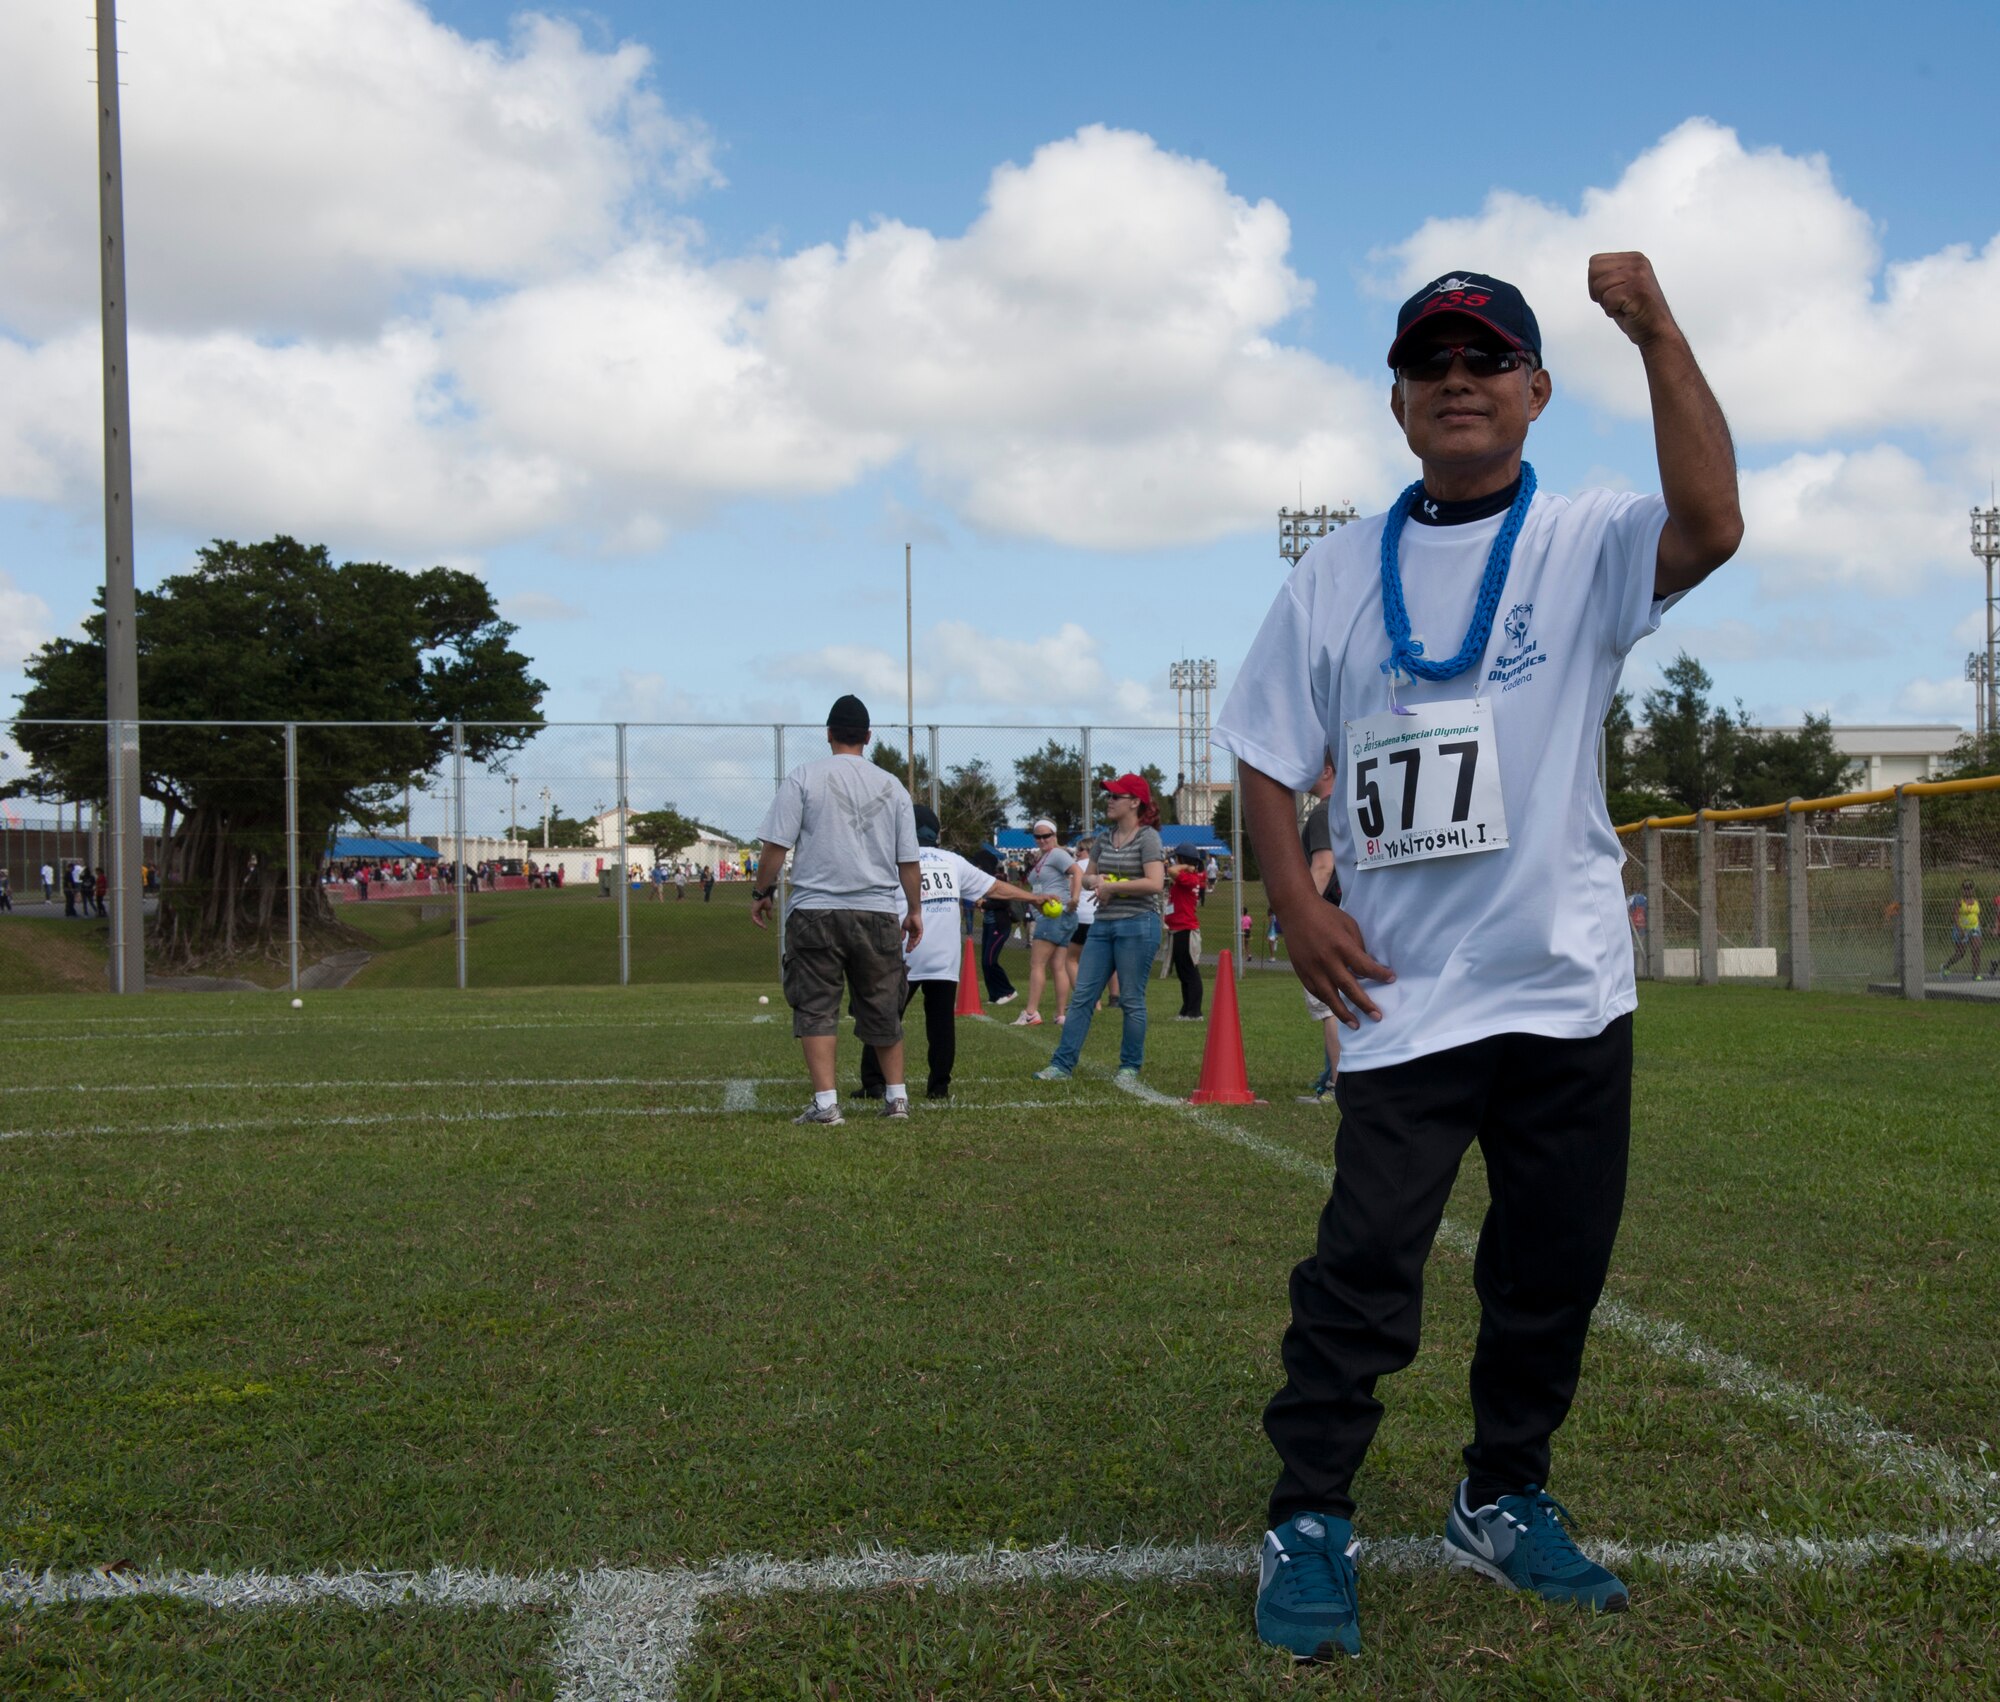 Yukitoshi Iriishigaki, a Kadena Special Olympics athlete, cheers after throwing a softball during the Kadena Special Olympics Nov. 7, 2015, at Kadena Air Base, Japan. KSO is a non-profit activity managed by volunteers from around the island and funded by donations as a goodwill initiative to give back to those with special needs. (U.S. Air Force photo by Airman 1st Class Lynette M. Rolen/Relased)